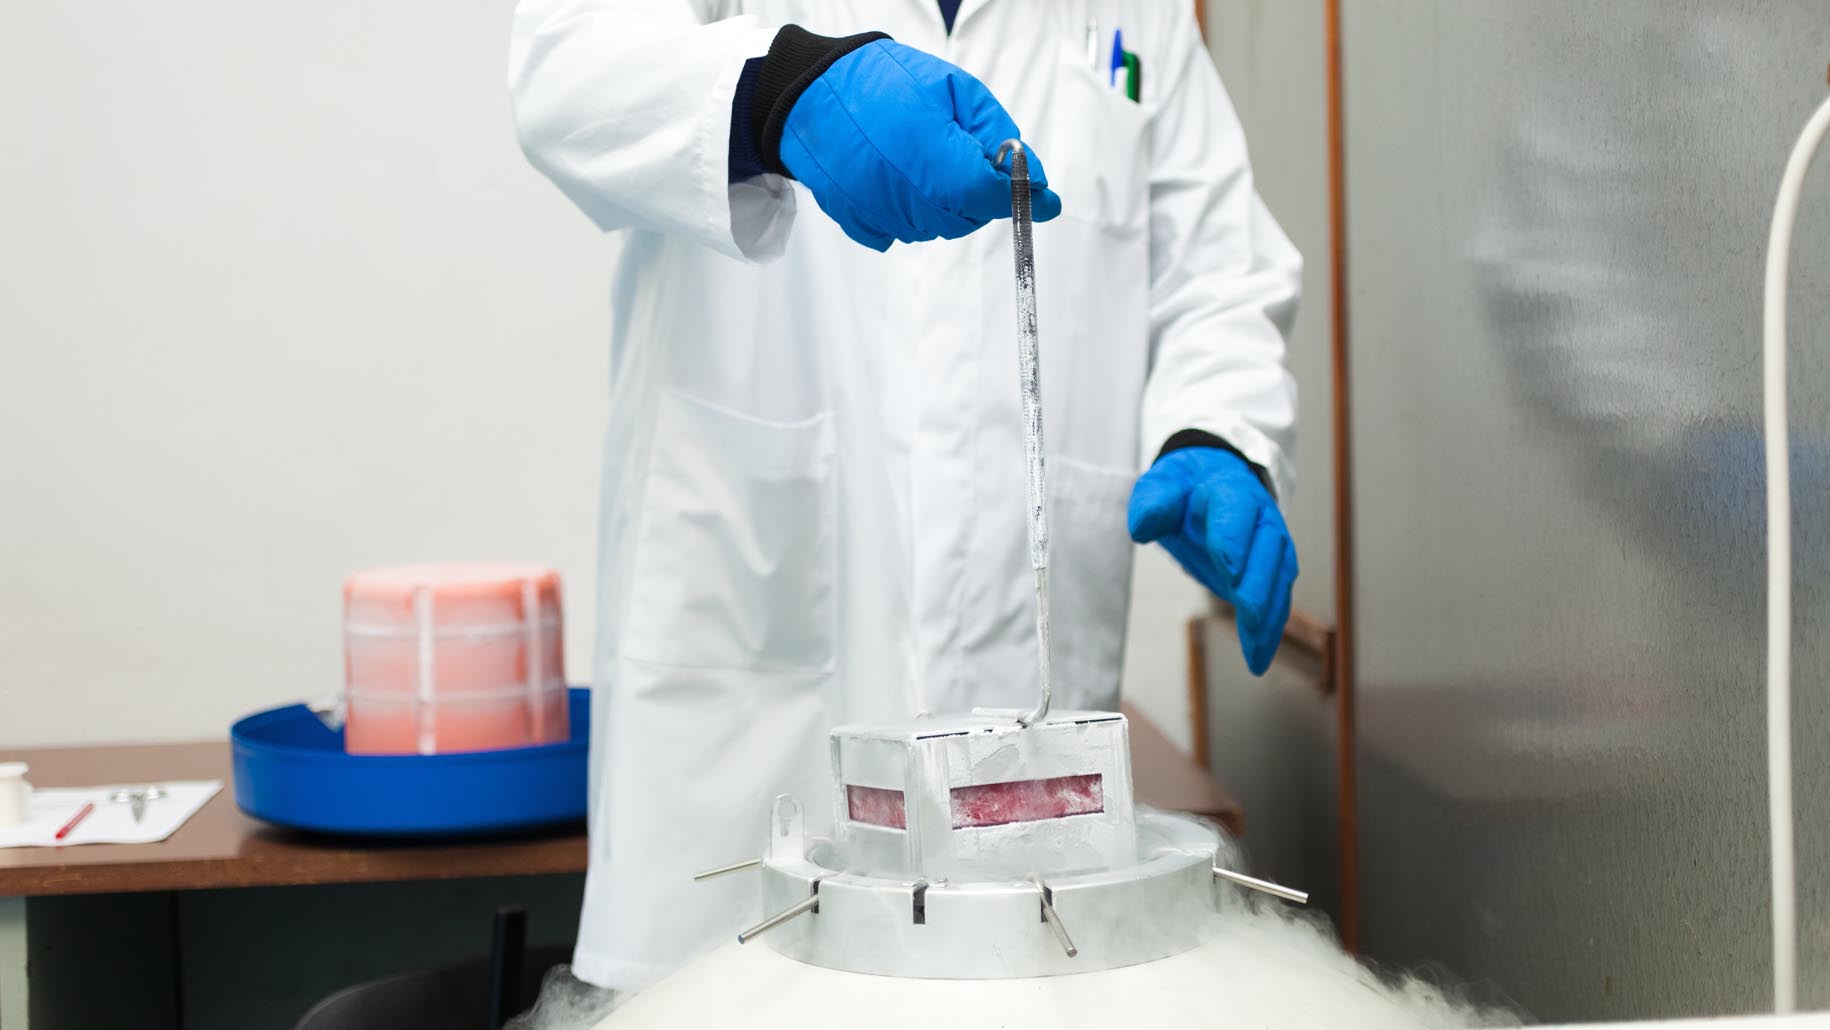 Scientist taking samples from a cryogenic nitrogen container in a science research lab